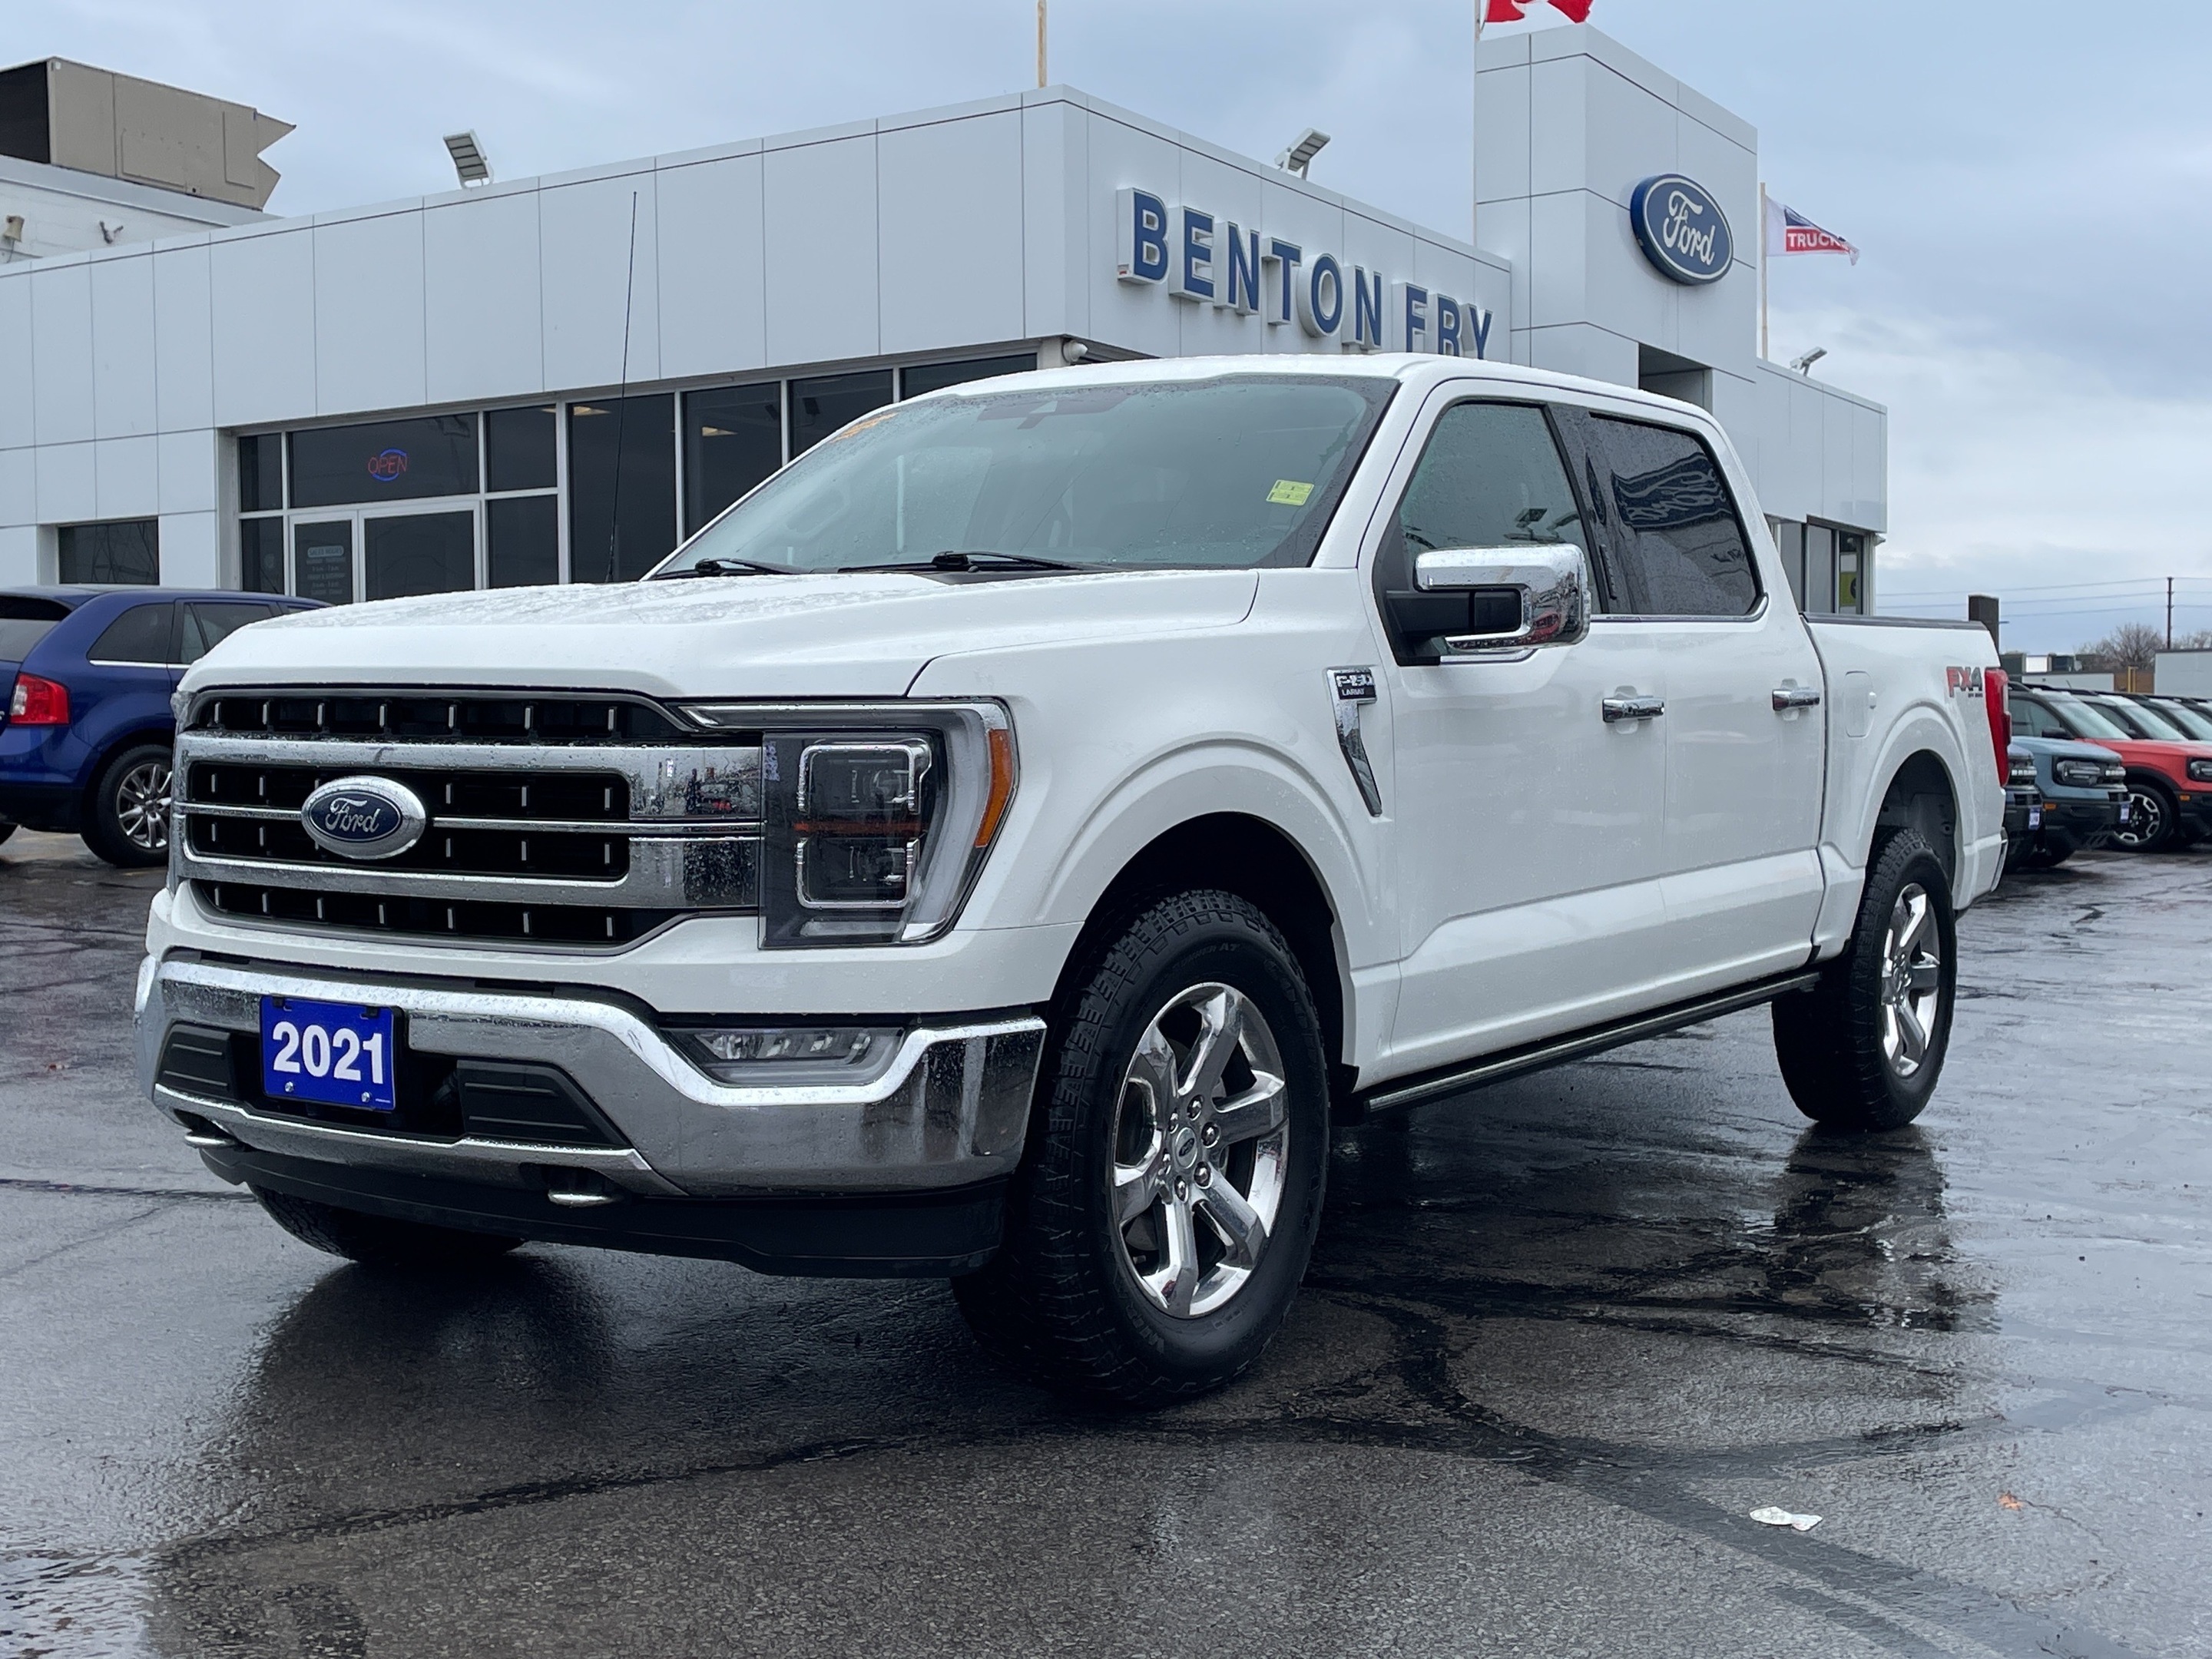 2021 Ford F-150 Lariat - Price Drop! Loaded Moon Leather Nav Chrom